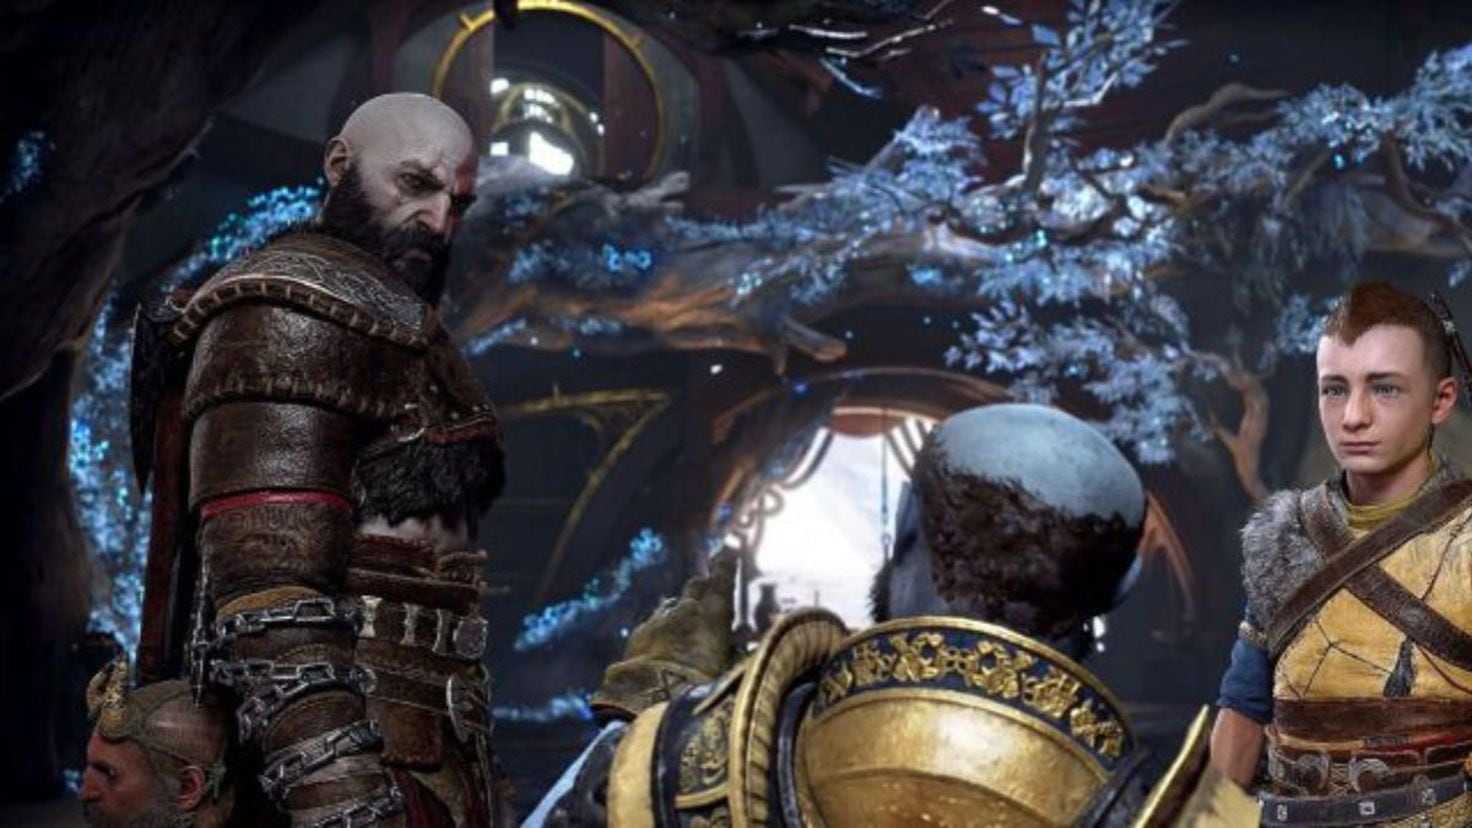 God of War sequel coming to PS5 in 2021 - Polygon